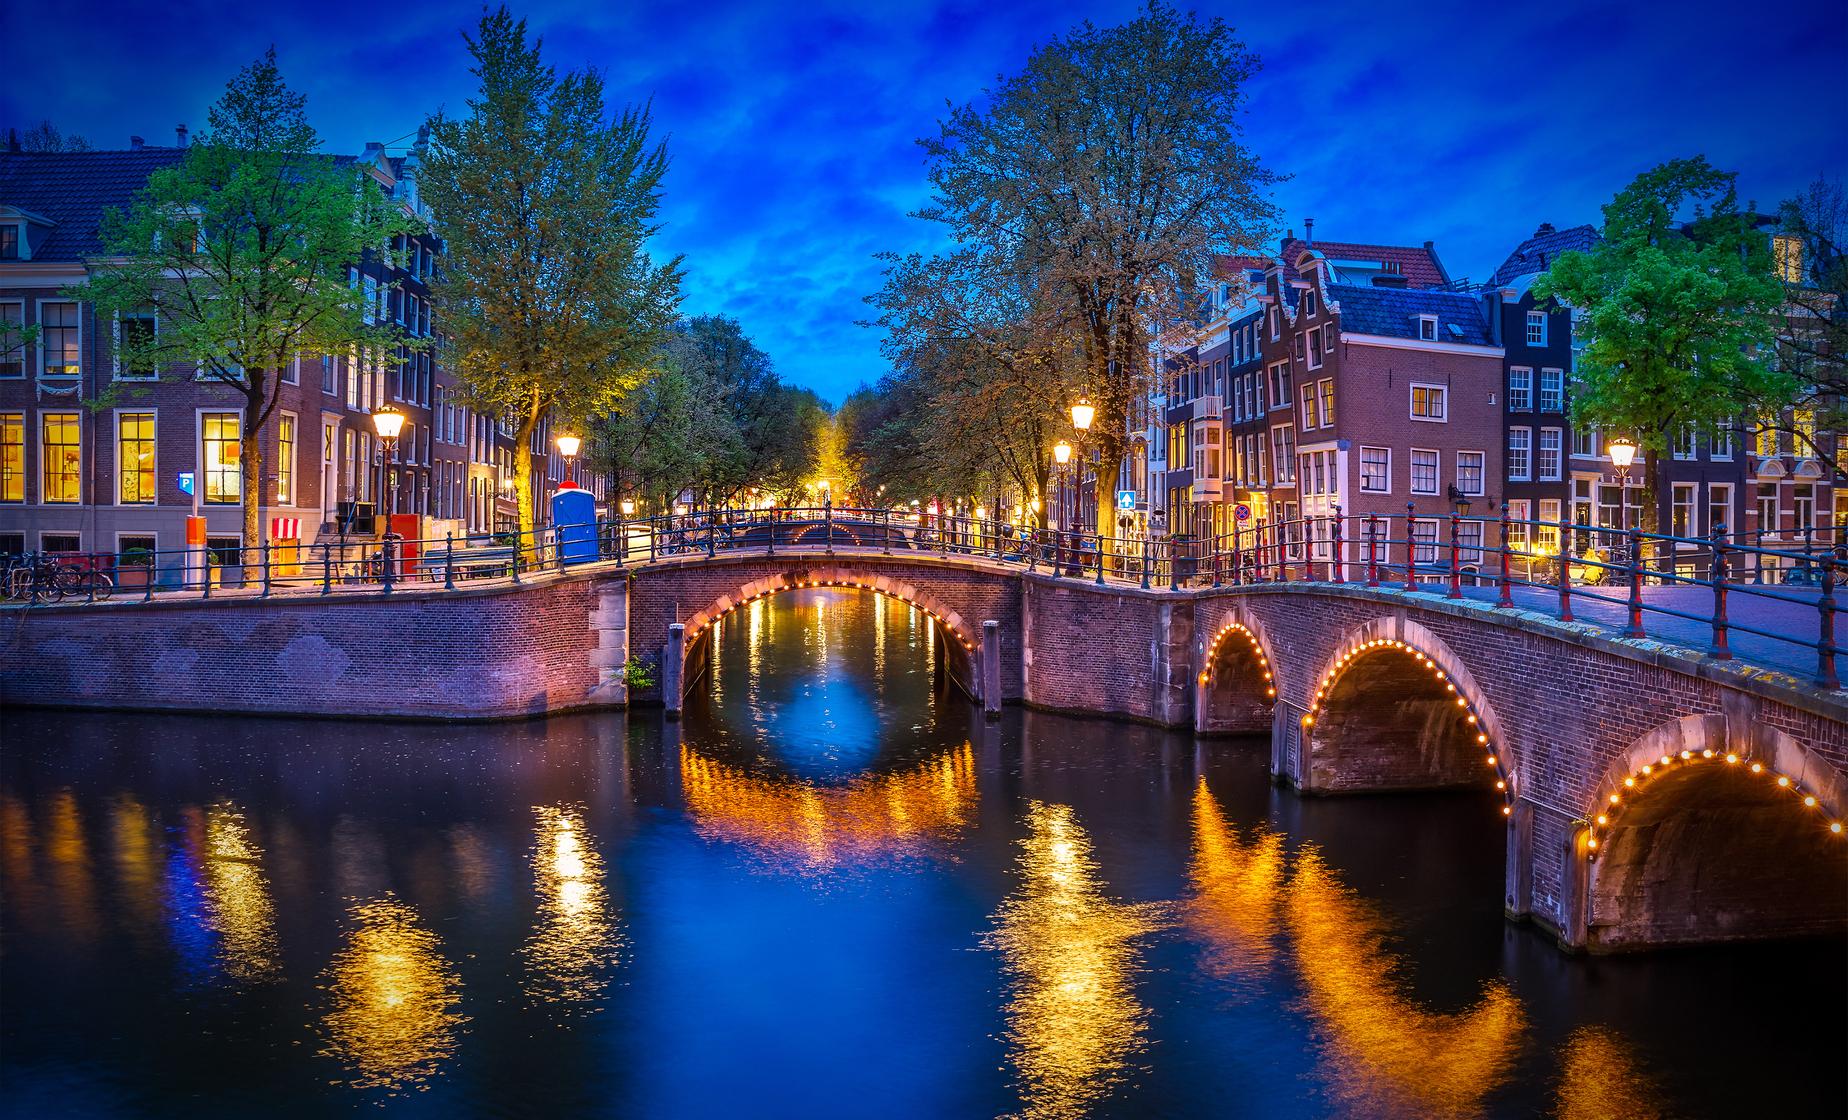 Candlelight Cruise Tour in Amsterdam (Venice of the North)